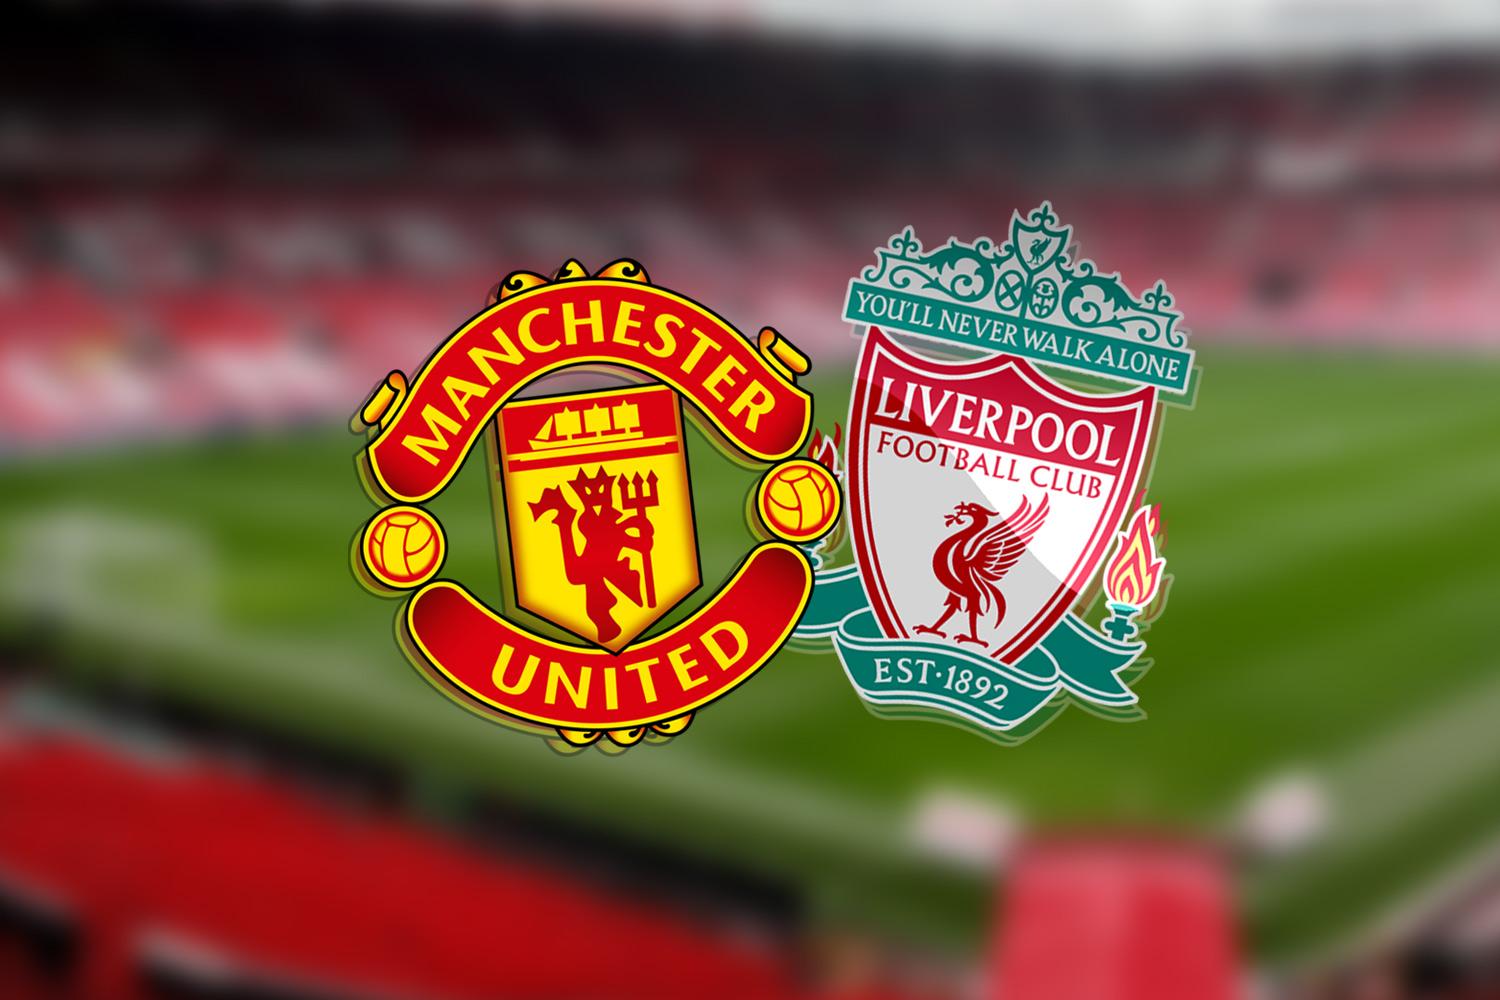 Man U Liverpool And Others In Talks For A FIFA-backed £4.6bn European Premier League